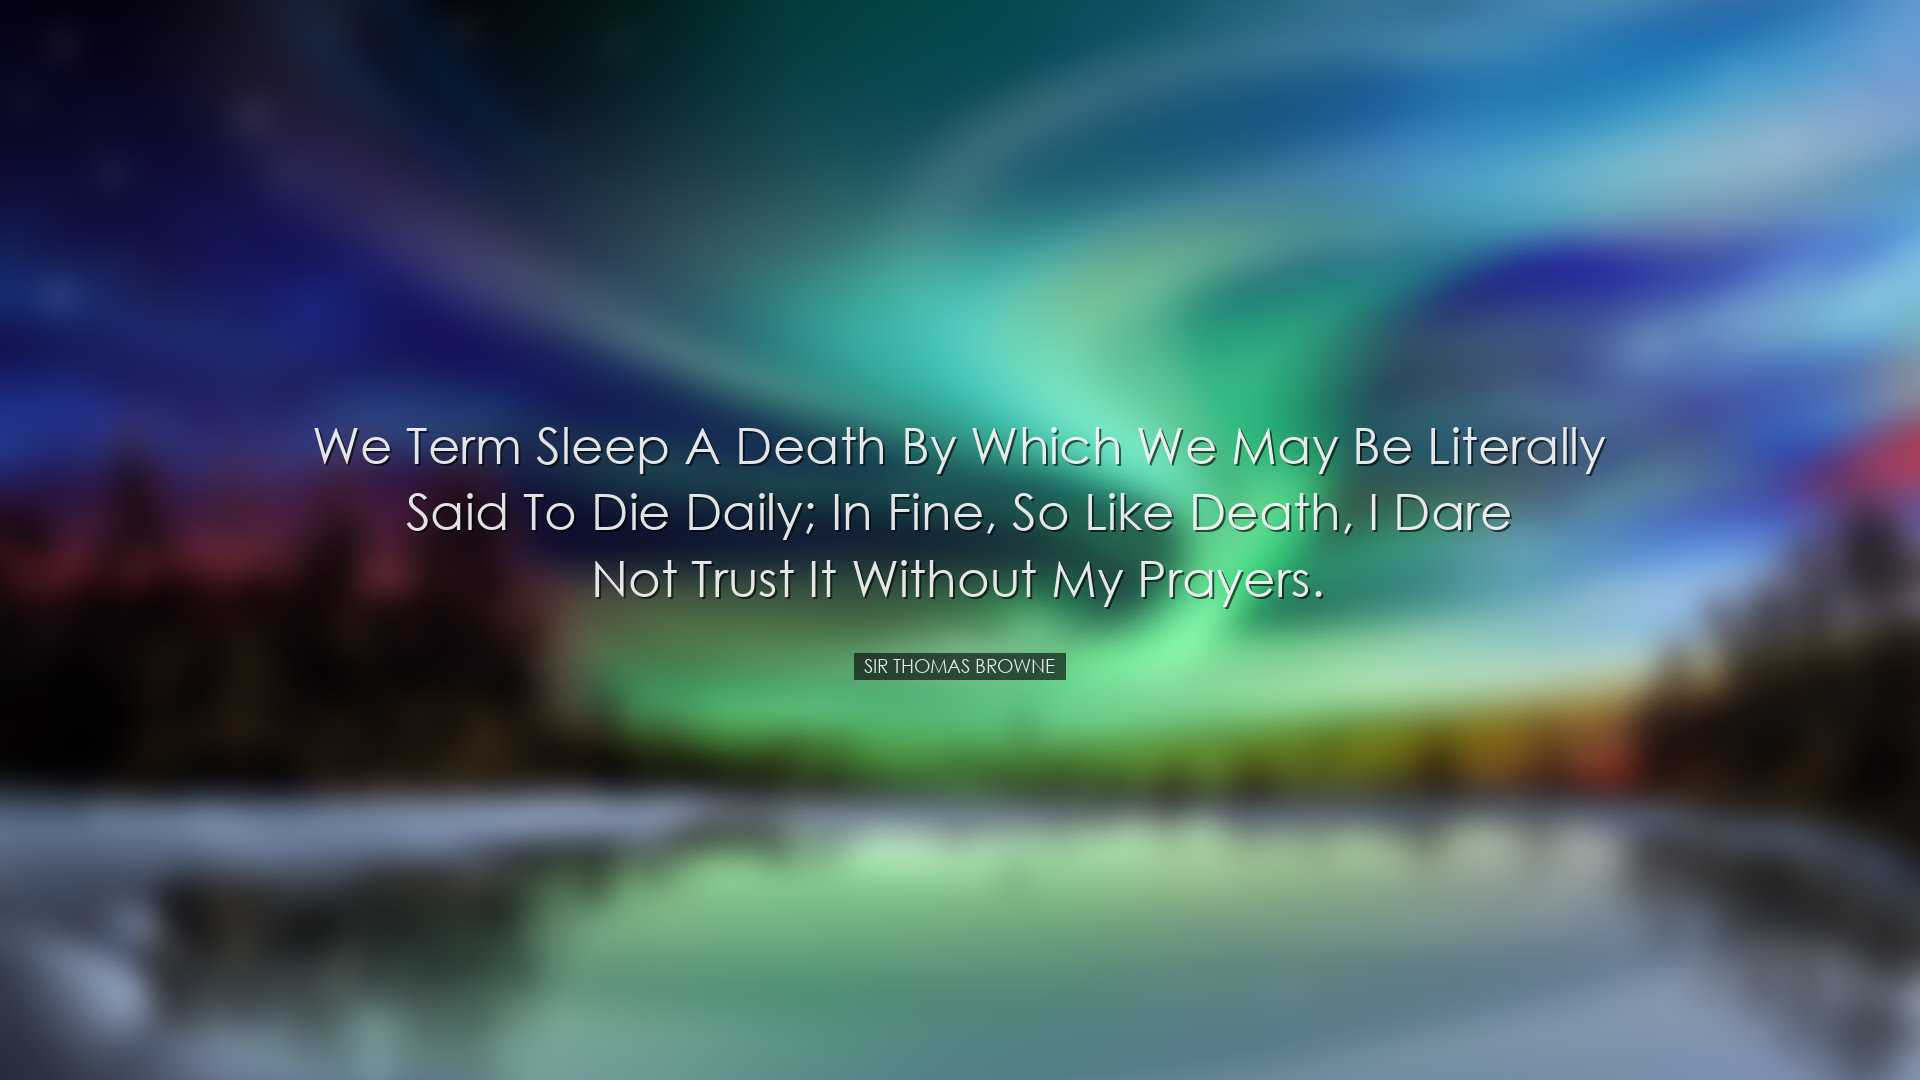 We term sleep a death by which we may be literally said to die dai